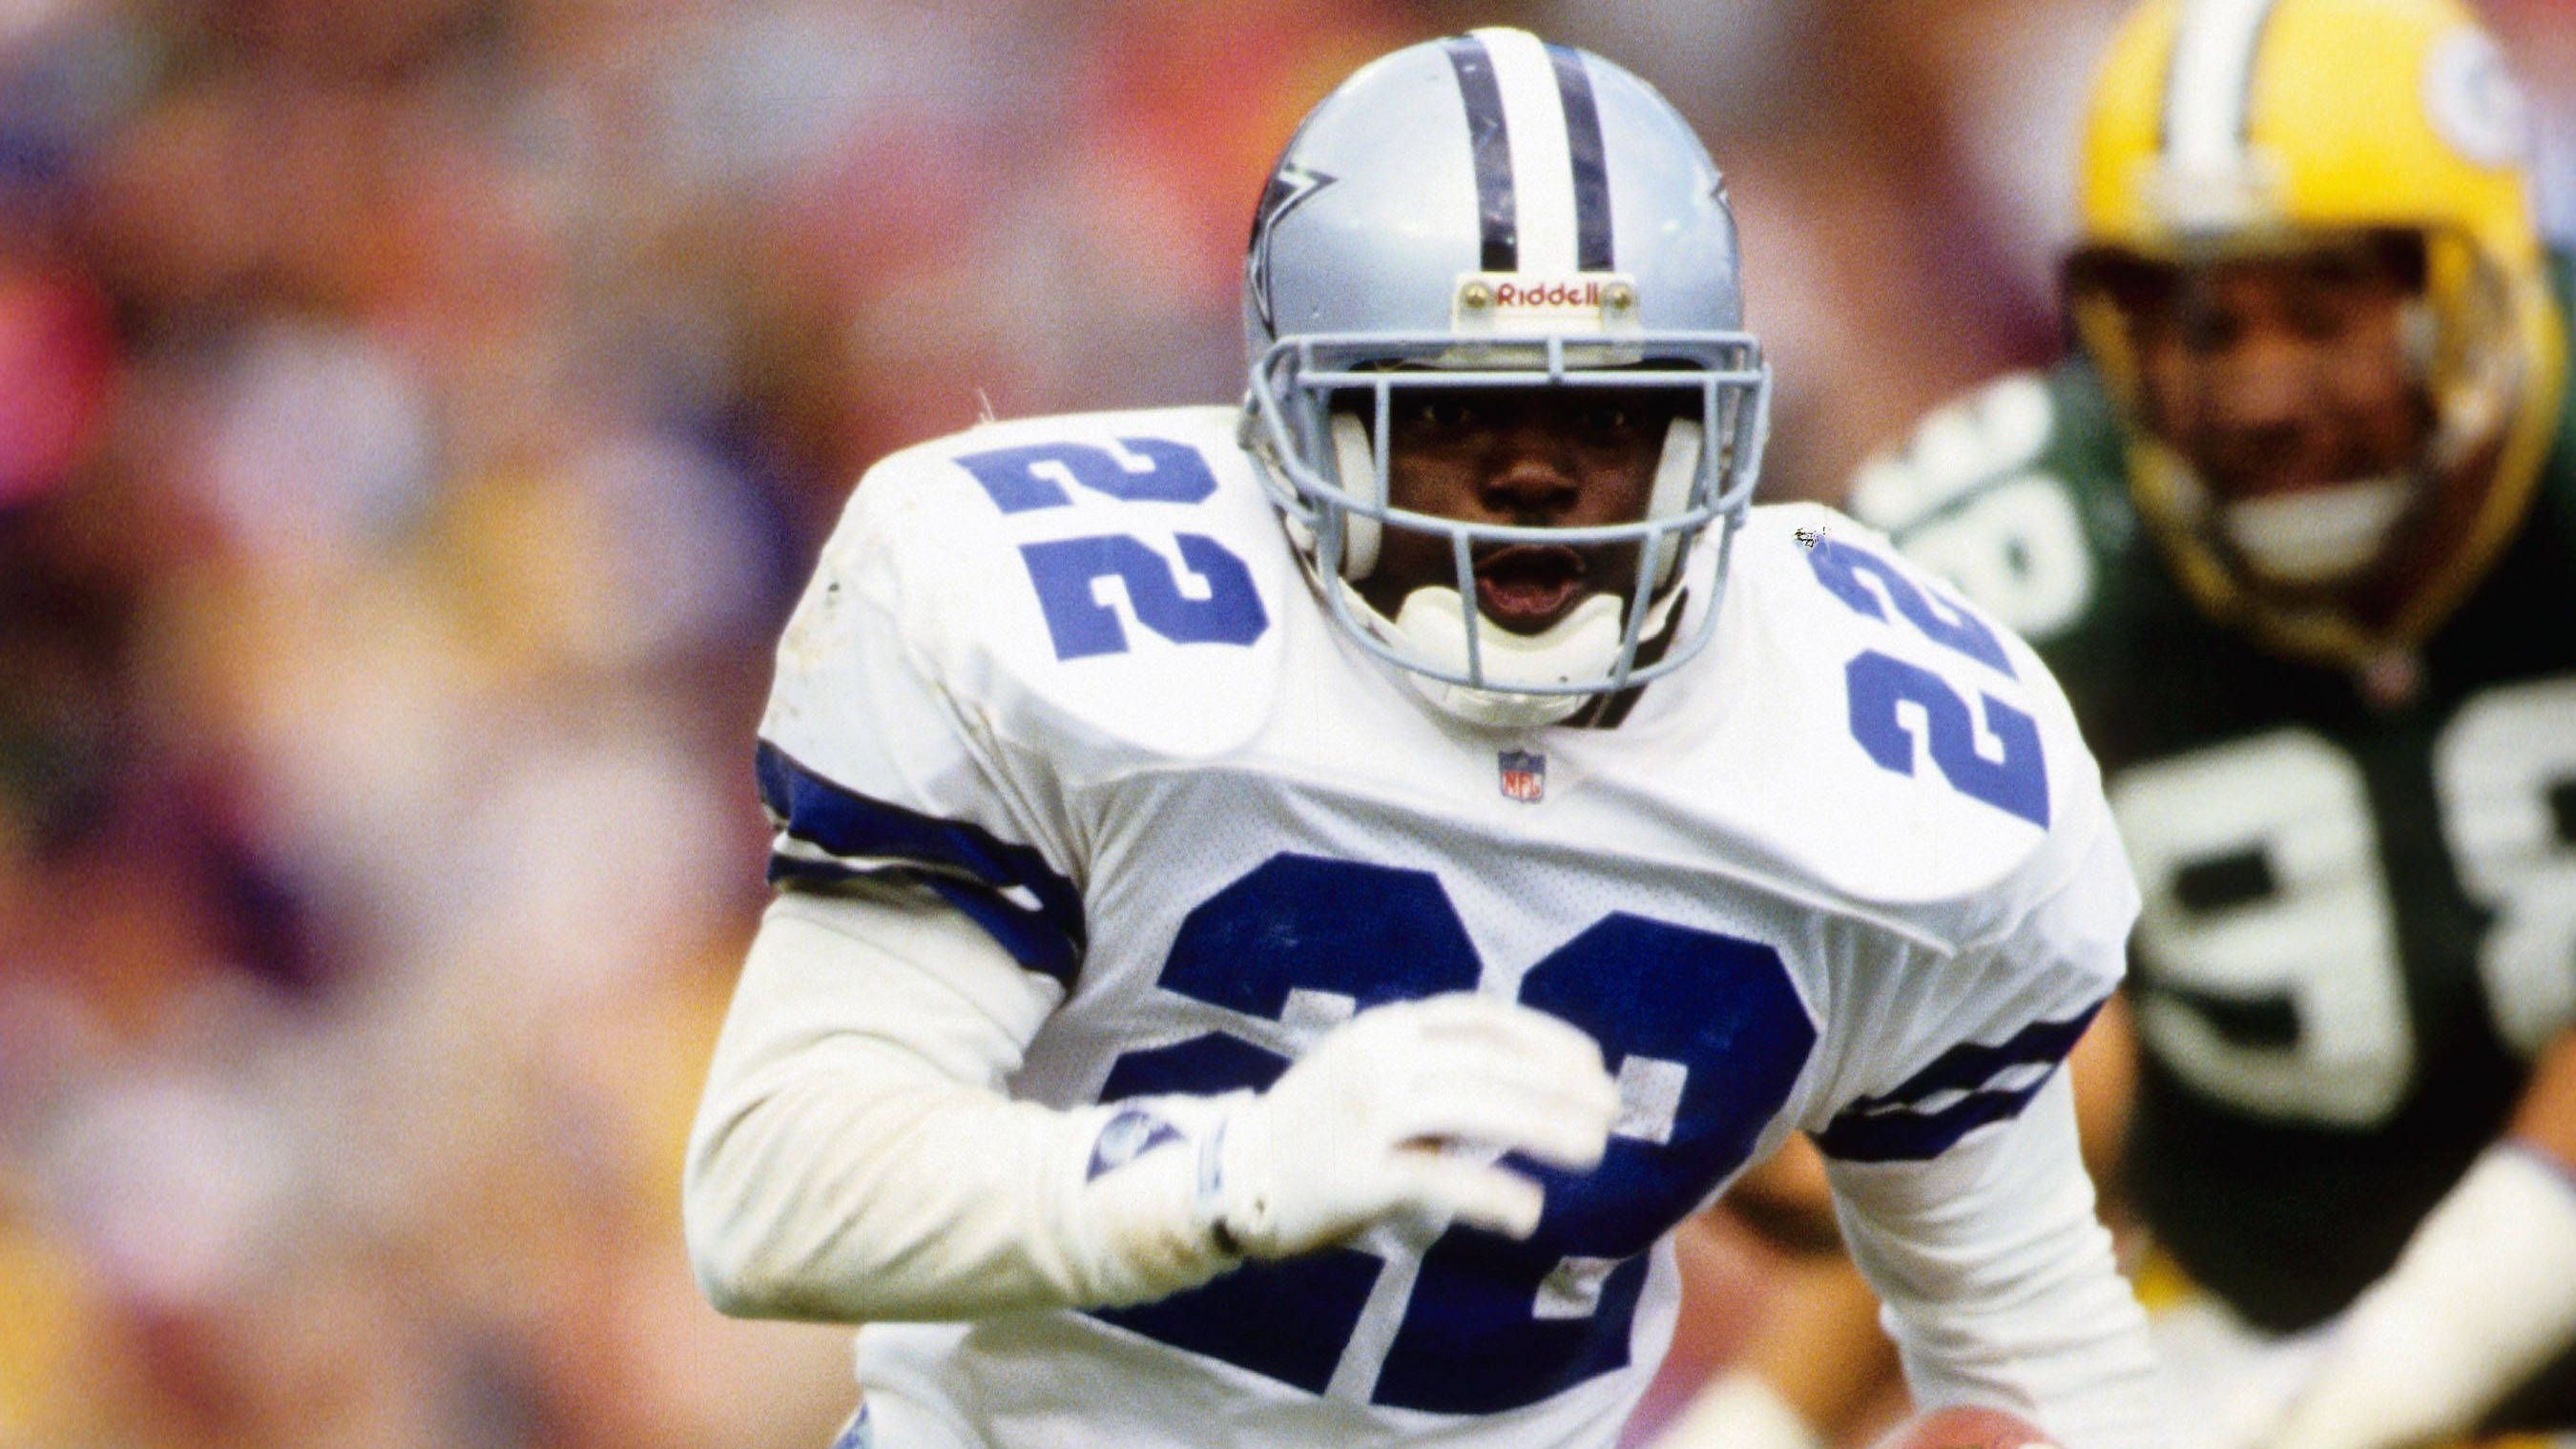 <strong>22: Emmitt Smith</strong><br>Teams: Dallas Cowboys, Arizona Cardinals<br>Position: Running Back<br>Erfolge: Pro Football Hall of Famer, dreimaliger Super-Bowl-Champion, 1993 NFL MVP<br>Honorable Mentions: Mike Haynes, Bobby Layne